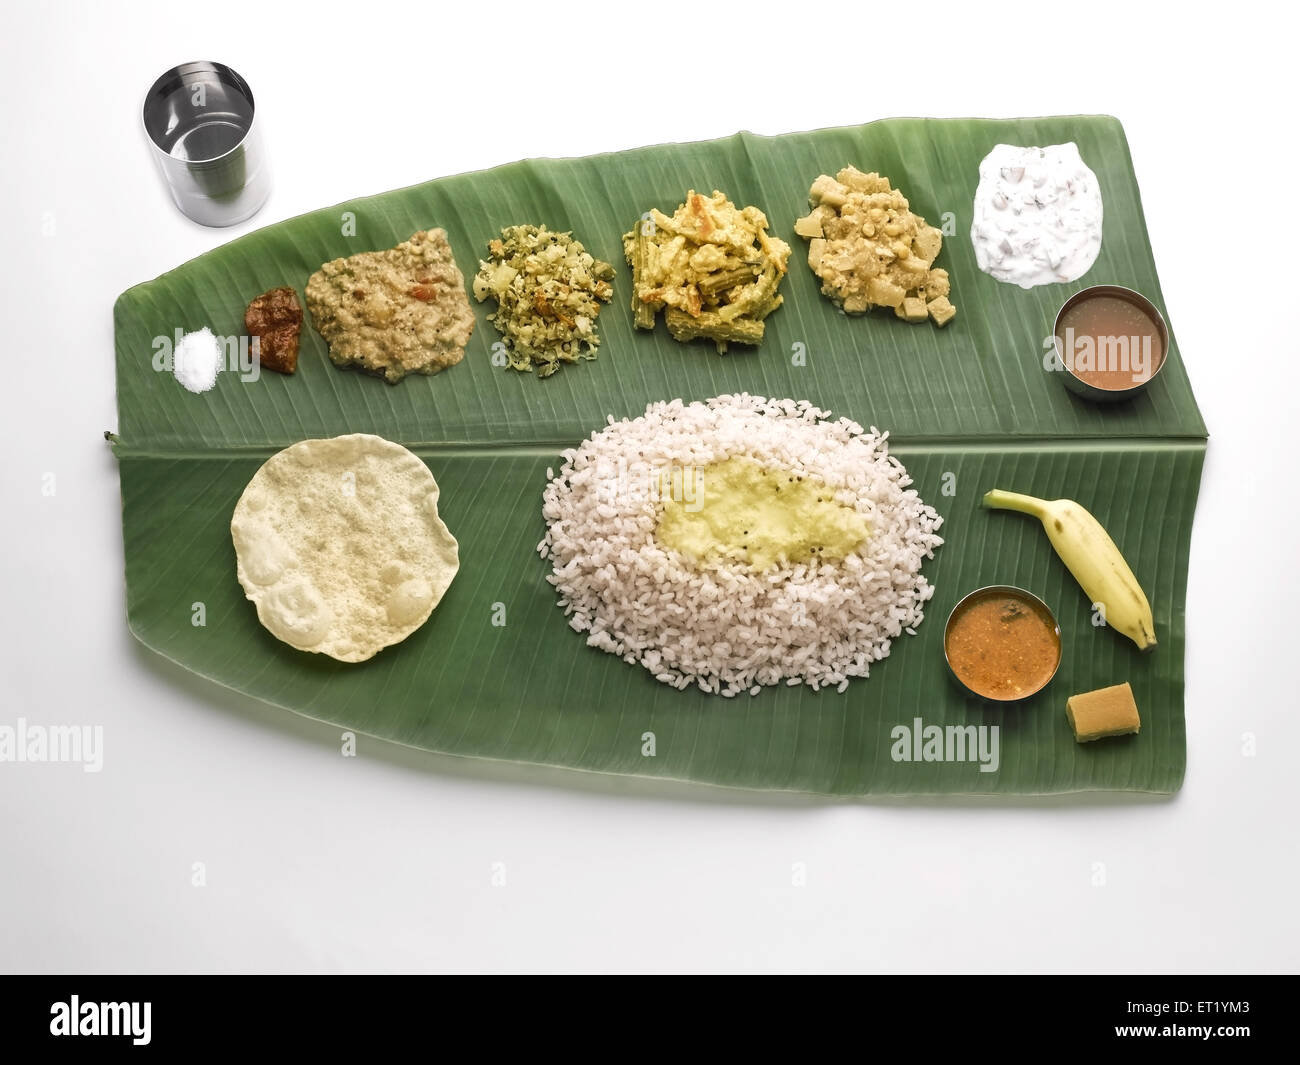 South Indian lunch served on green banana leaf Stock Photo